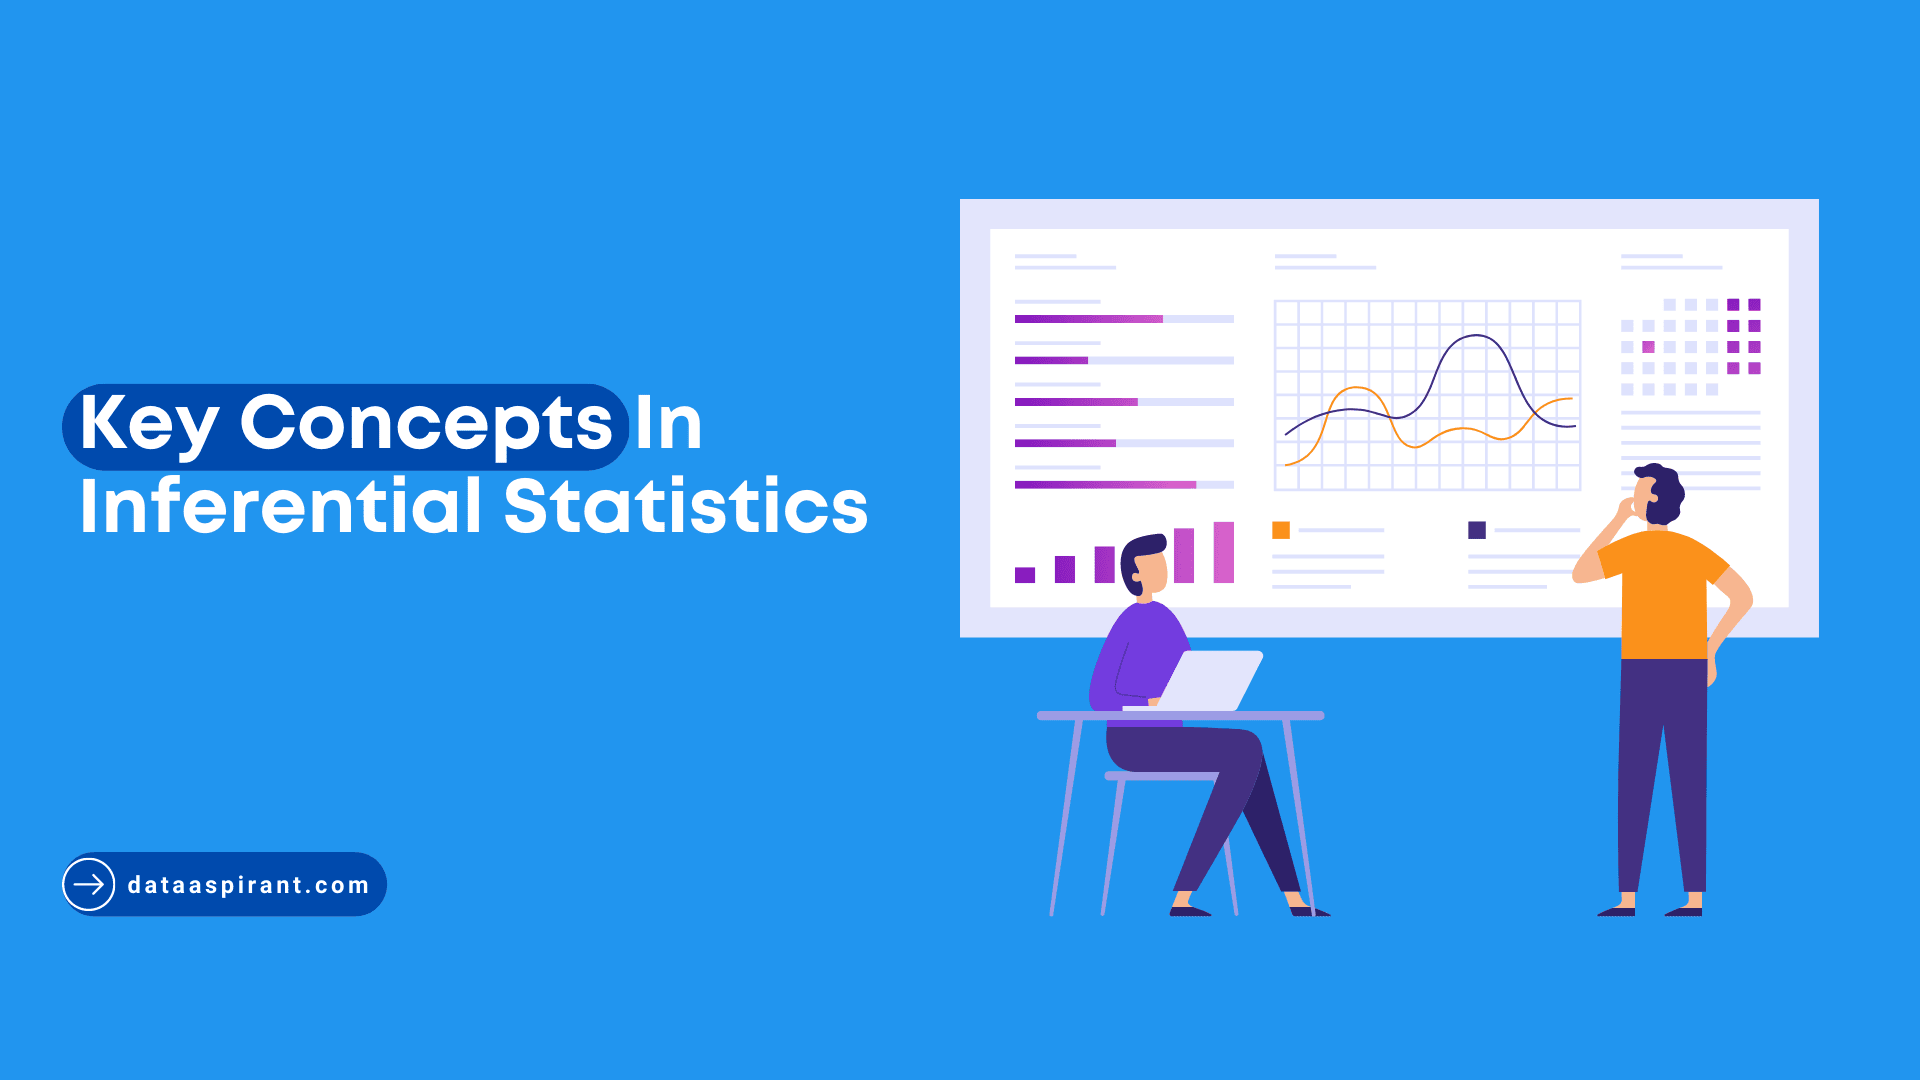 Key Concepts In Inferential Statistics